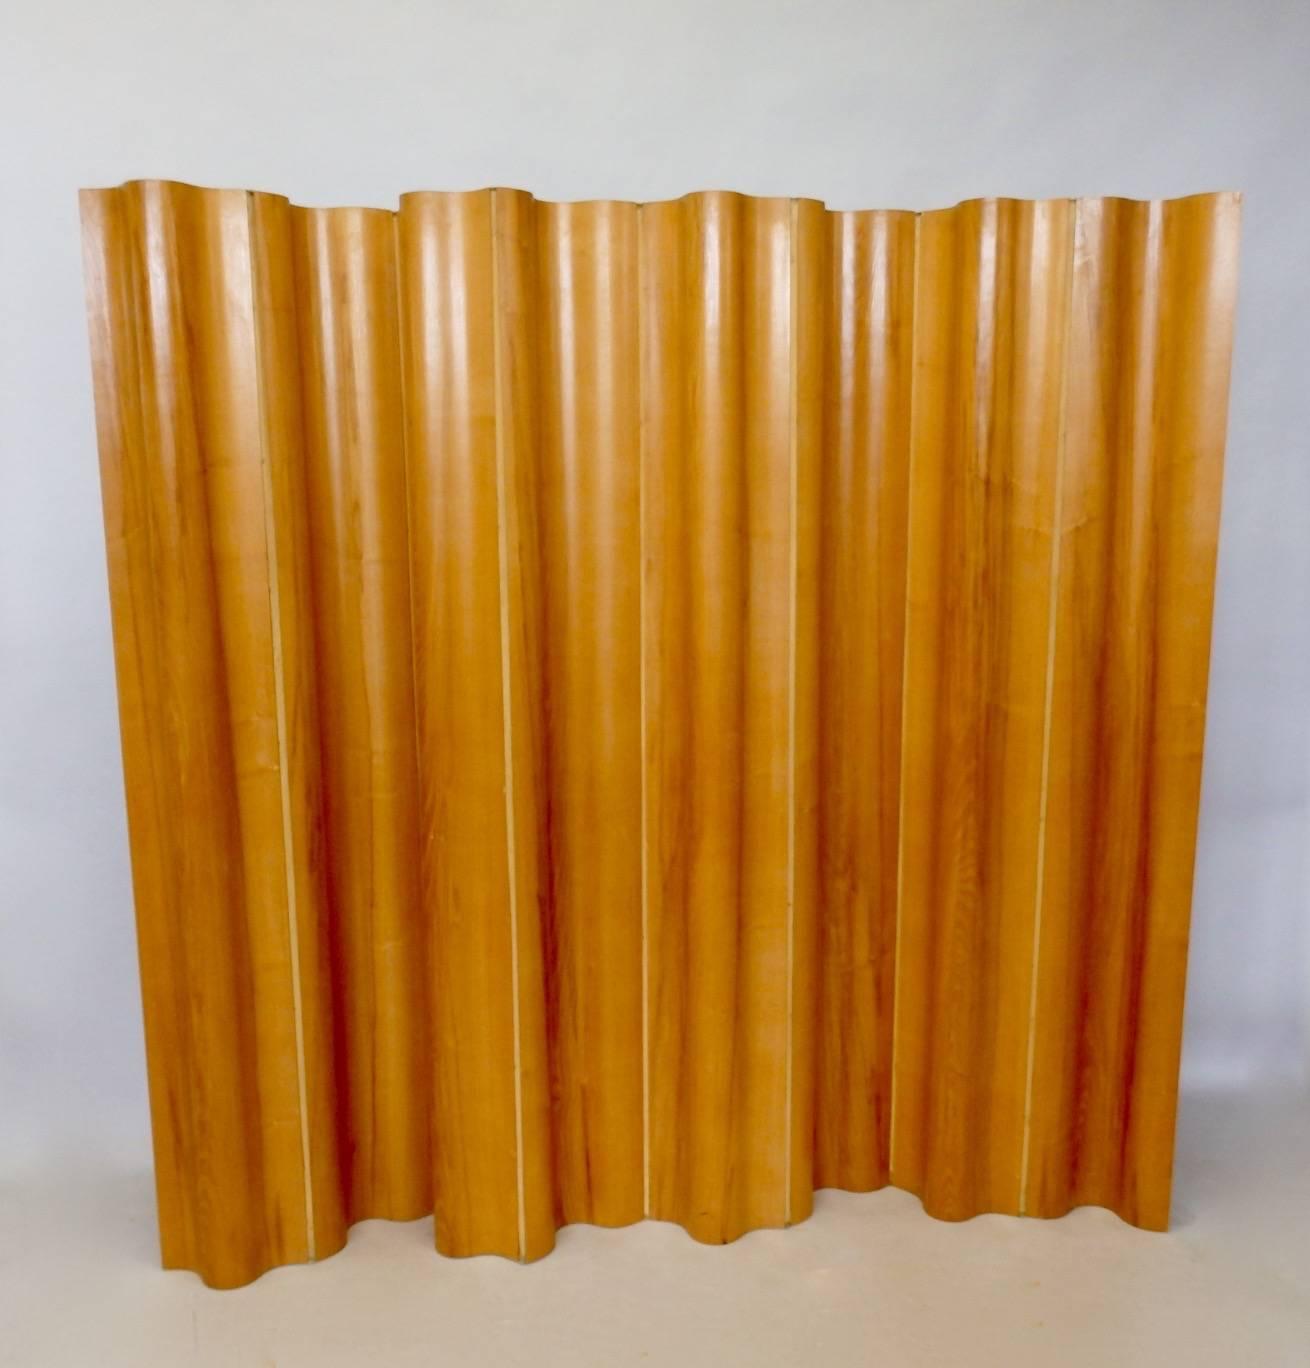 Developed as a result of Charles Eames experiments for molded plywood. Resulting in his leg splint for the U.S. Government and later advancement in mass produced furniture design. This FSW - 8 that is folding screen wood eight panels I believe to be